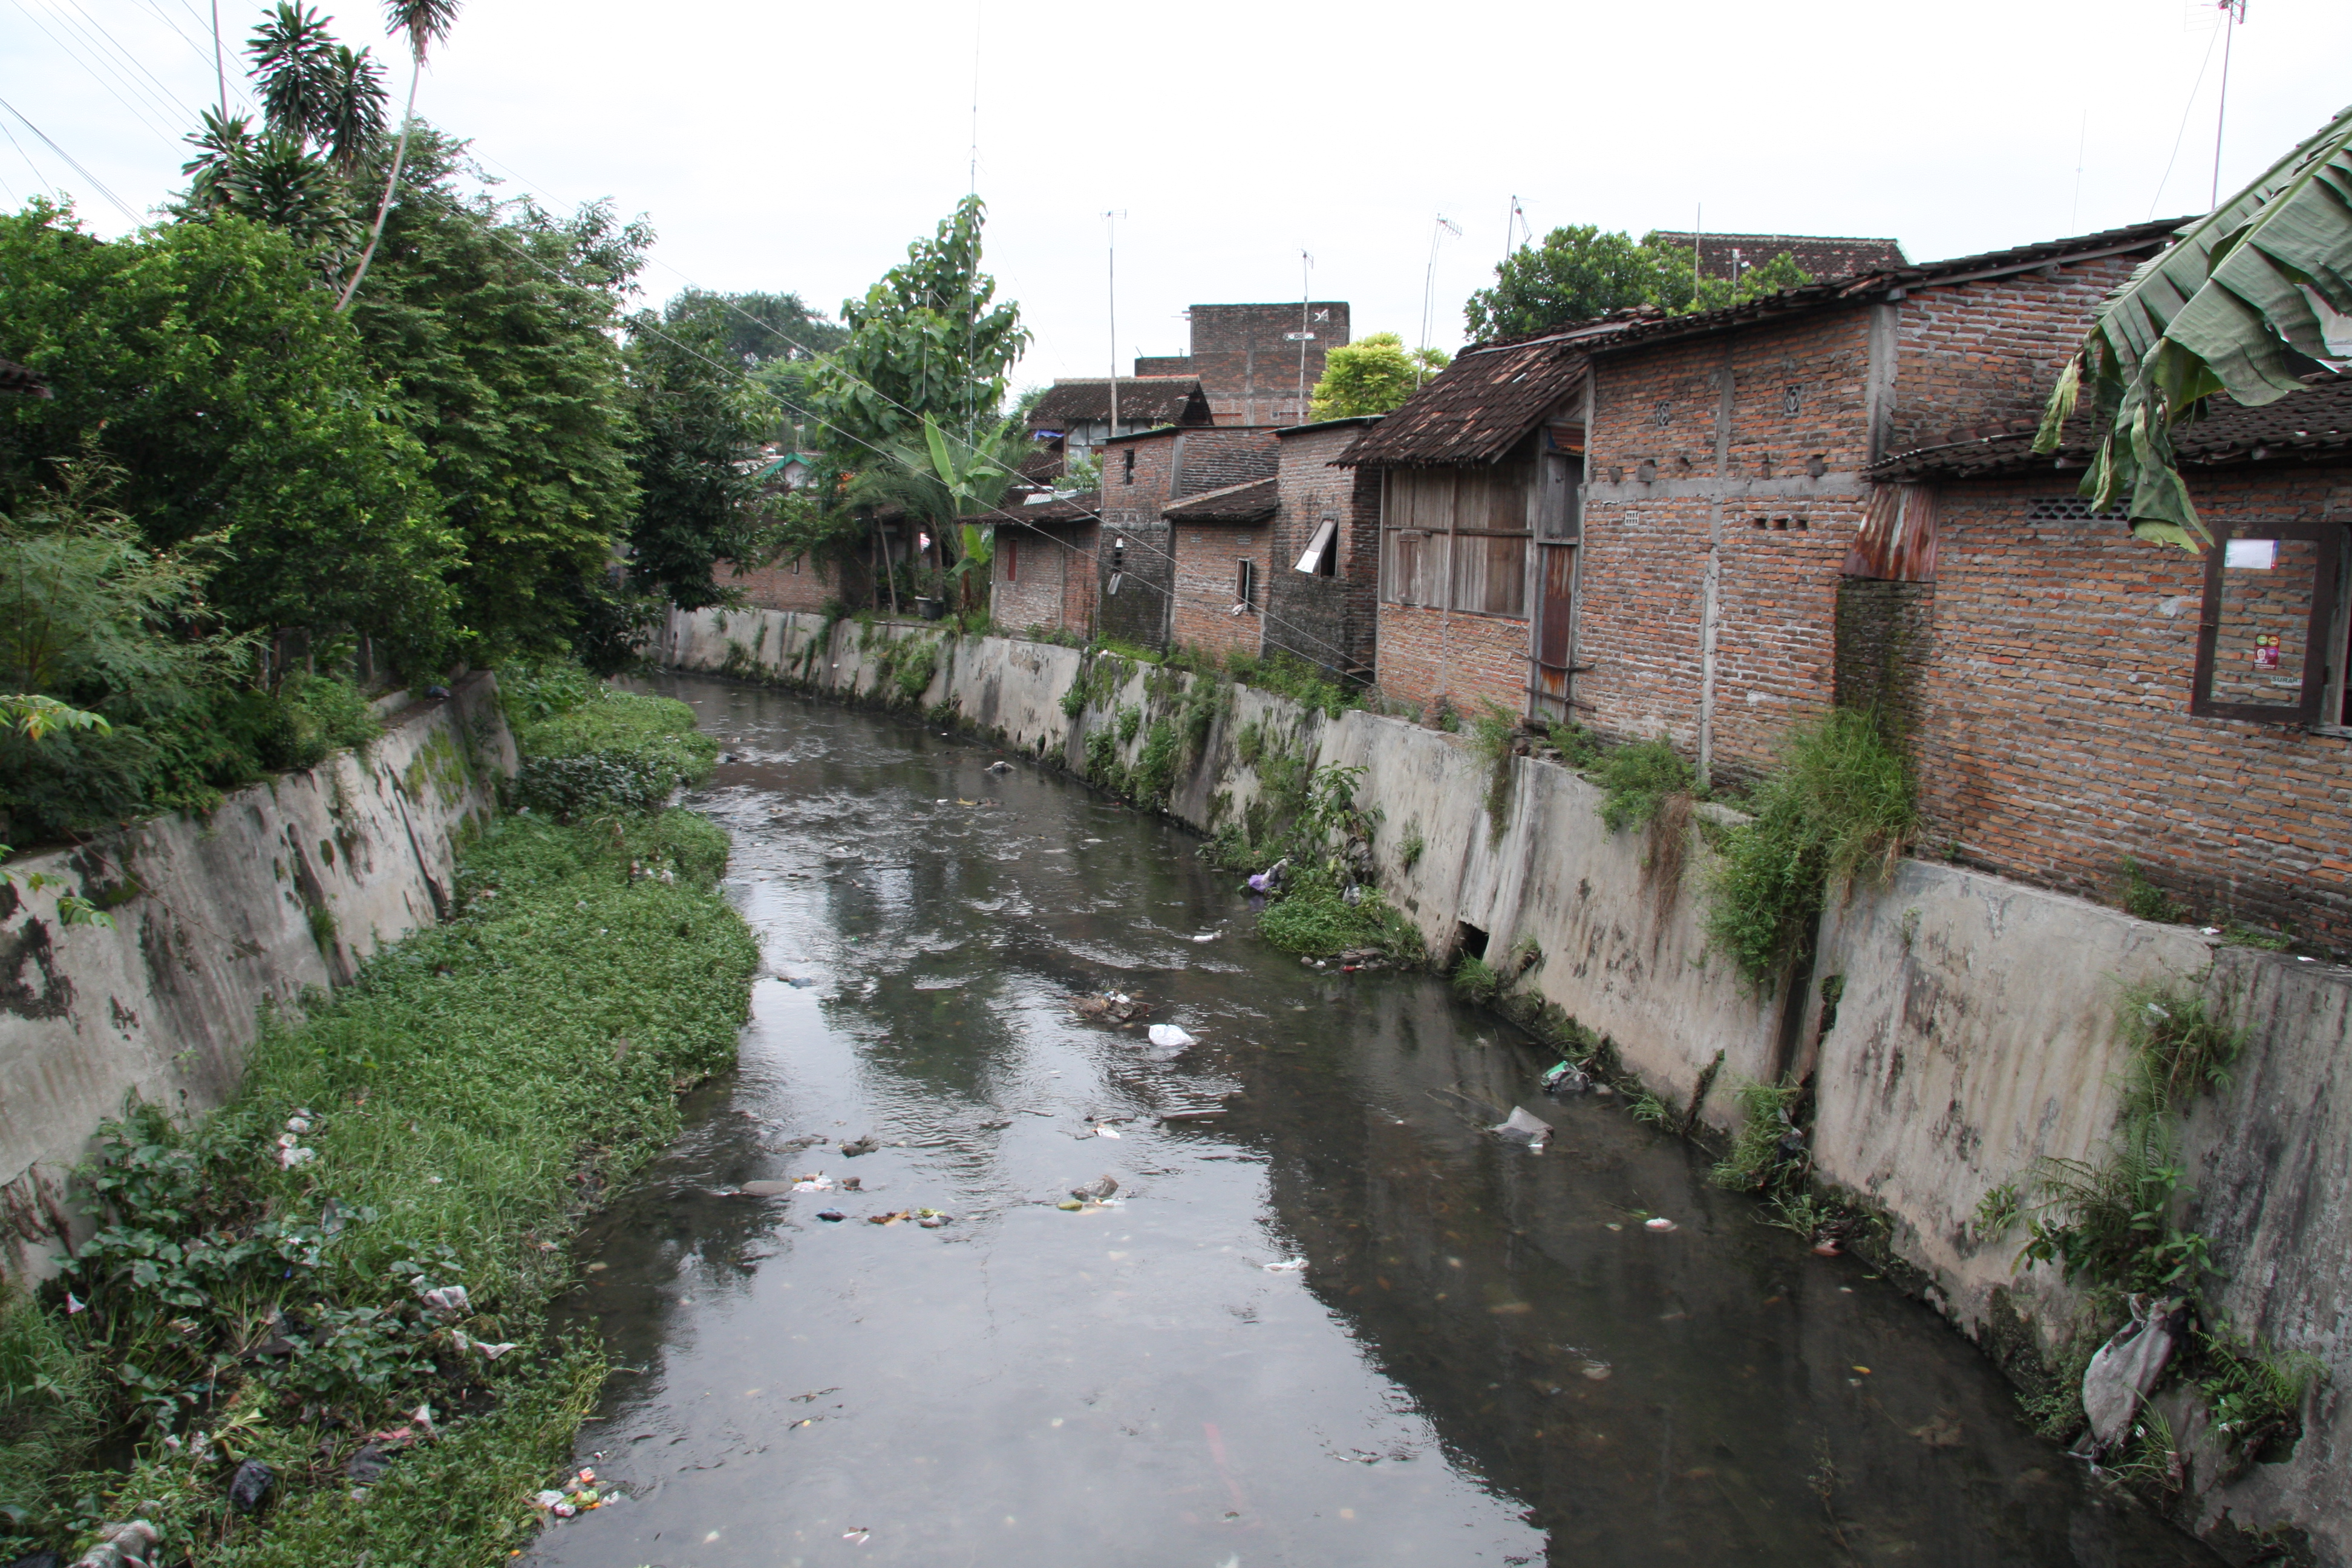 Back of informal housing and canal